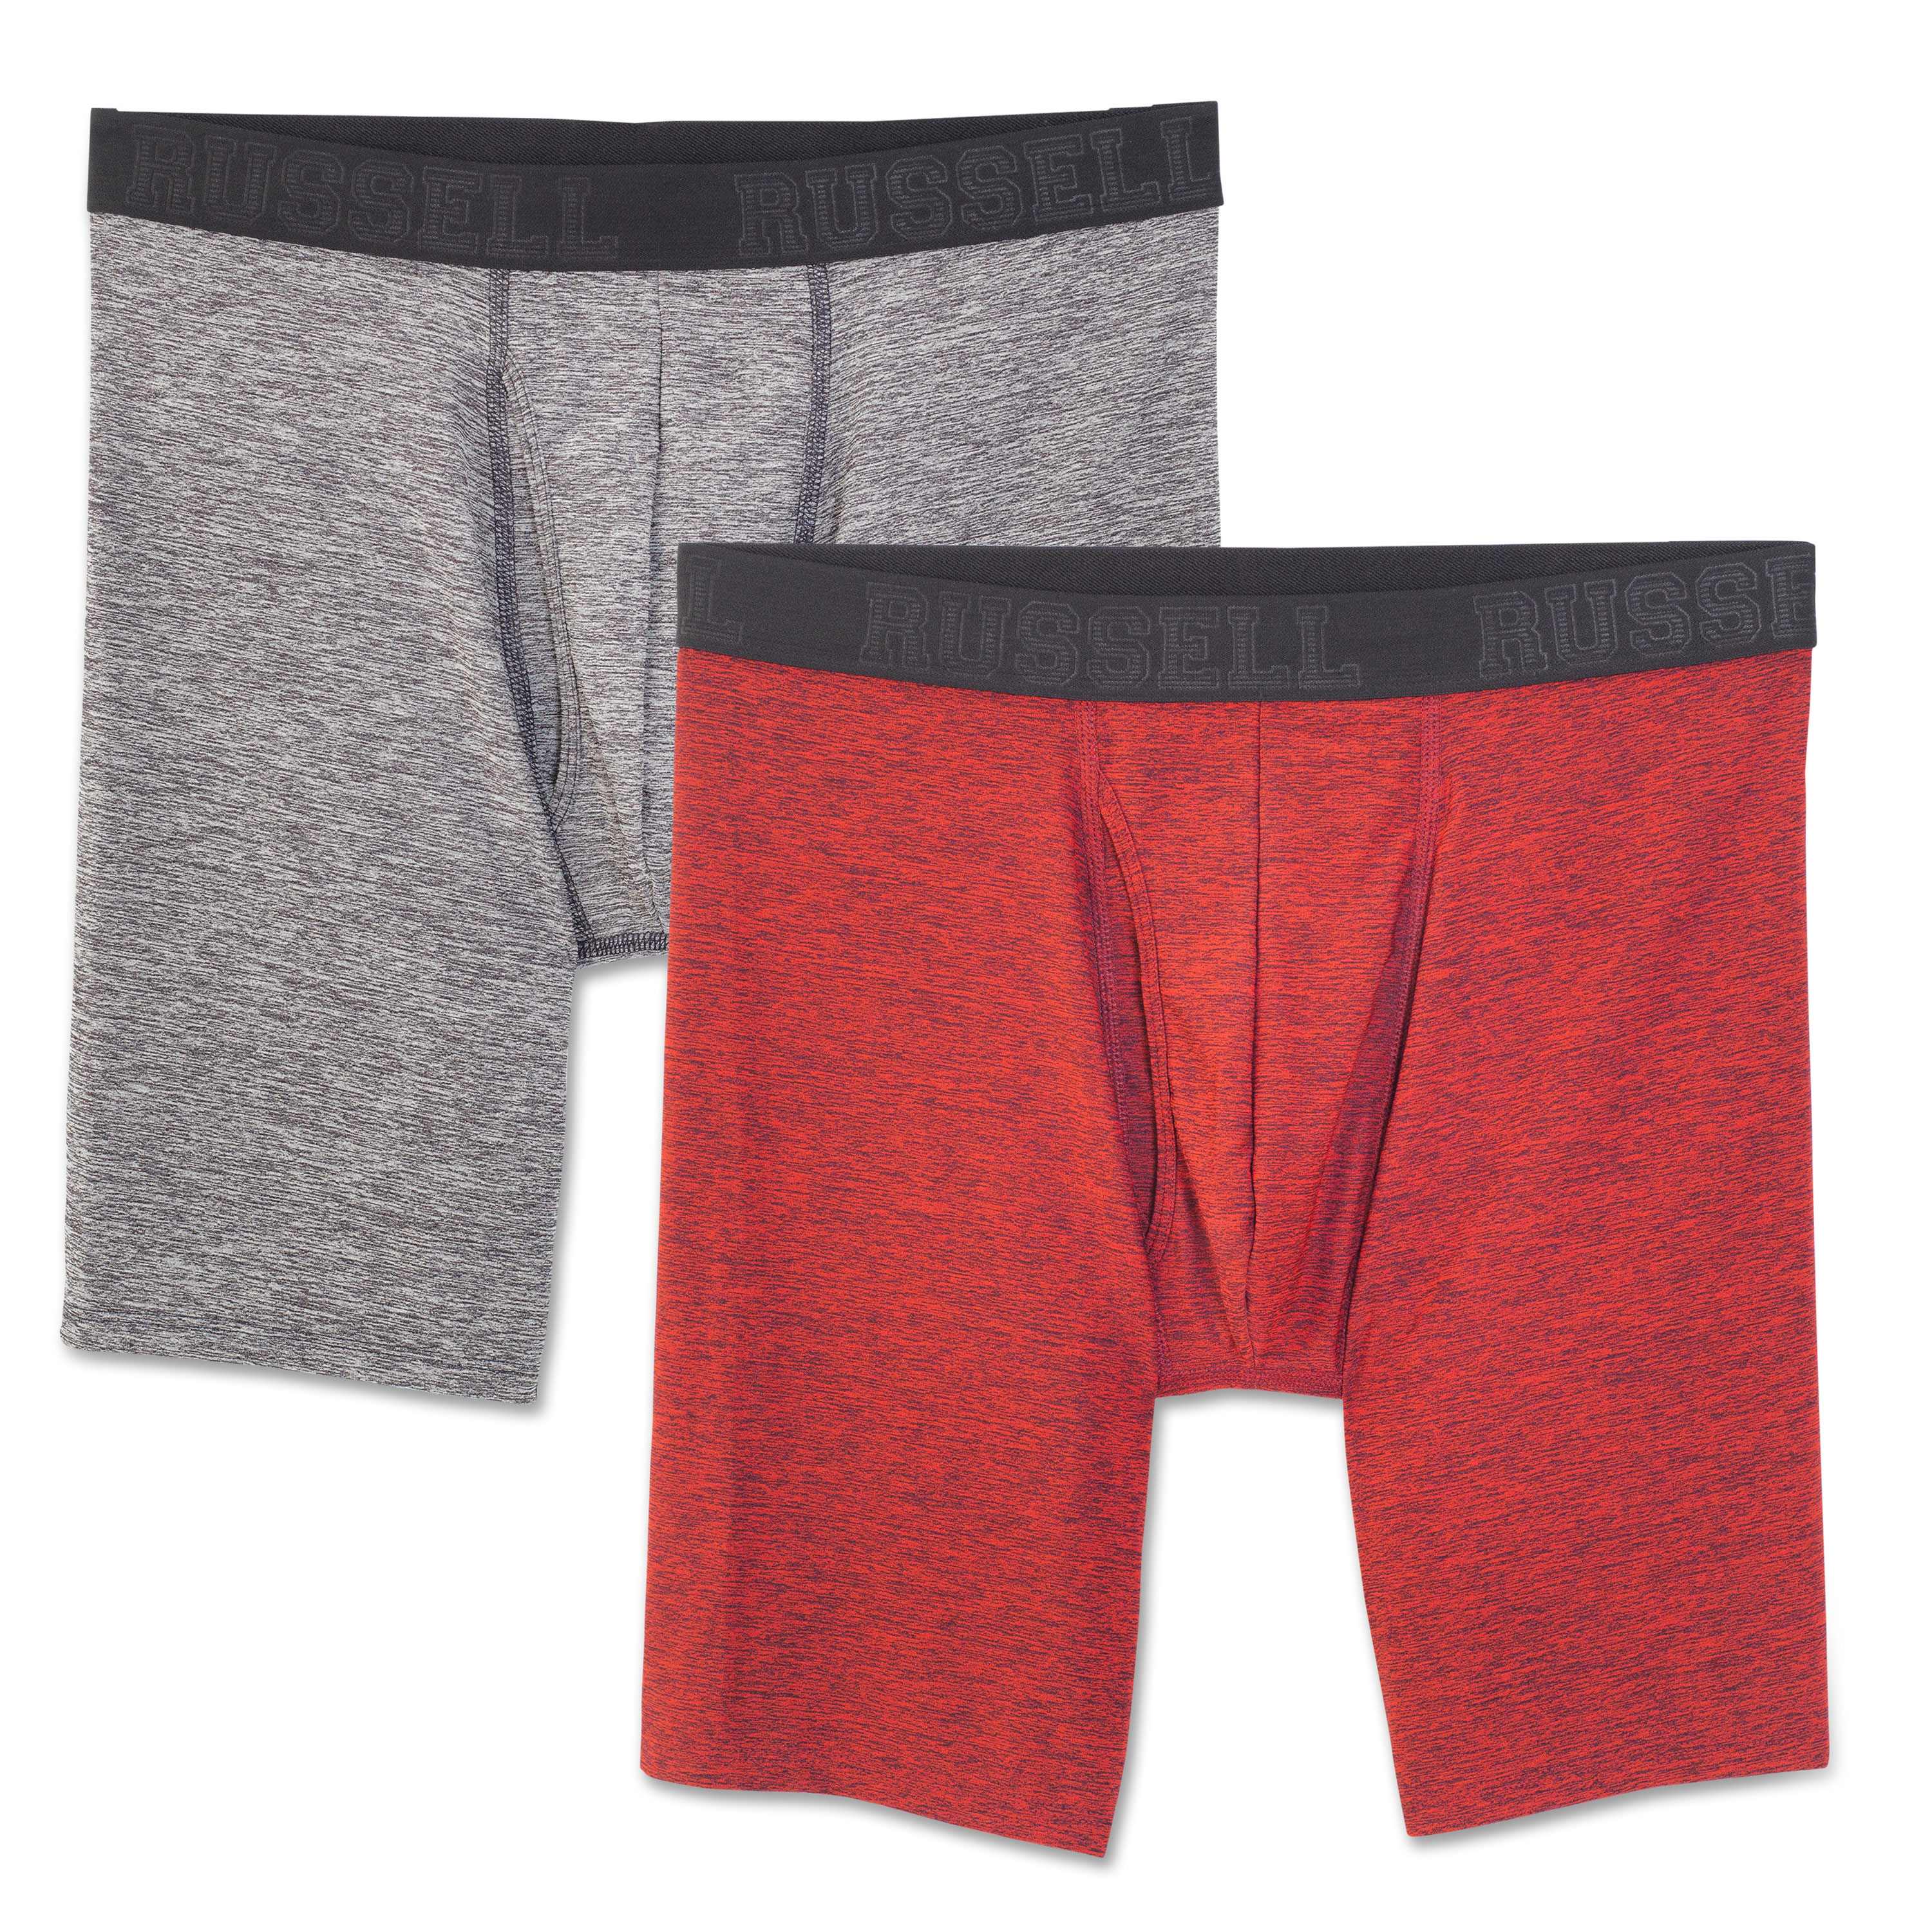 Russell Athletic Performance Men's Boxer Briefs (S-2XL; 6- or 12